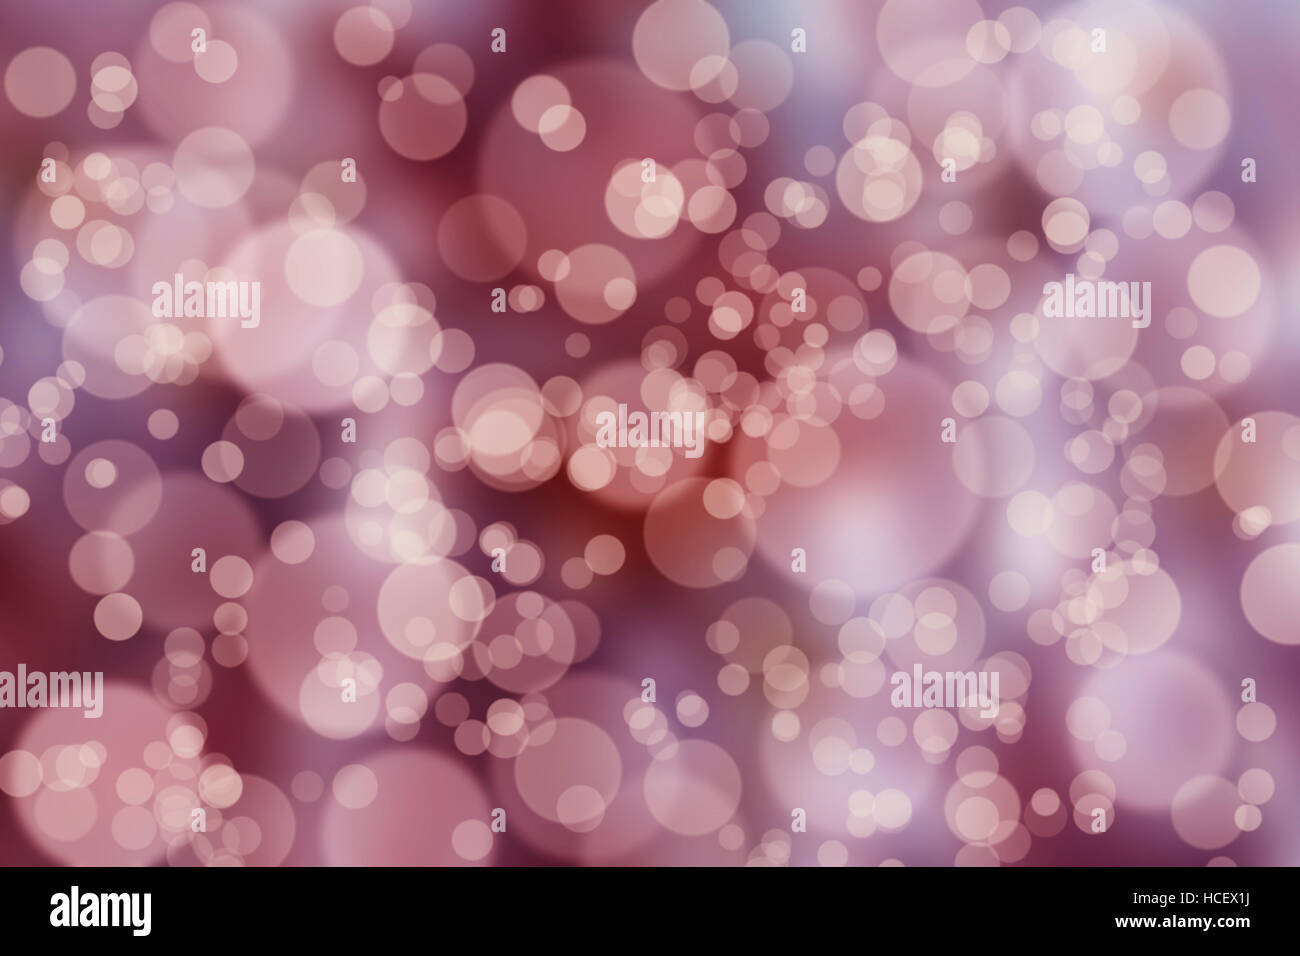 Light Pastel Pink Glitter Sparkle And Shine Abstract Background Stock Photo  - Download Image Now - iStock